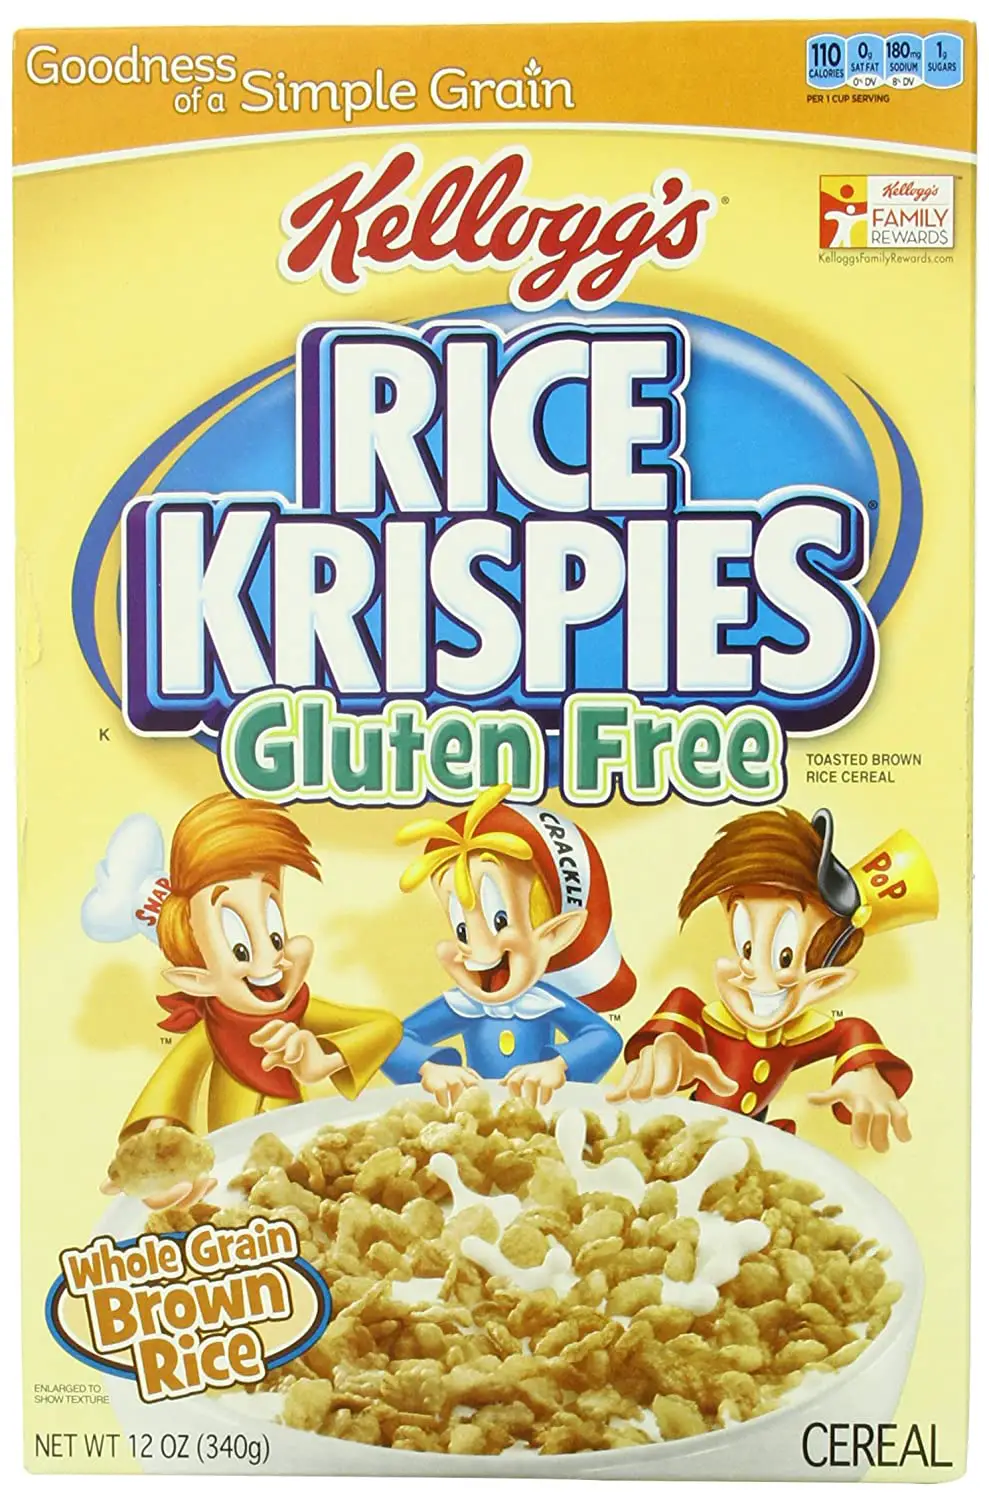 Brown Rice Crispy Cereal Nutrition Facts